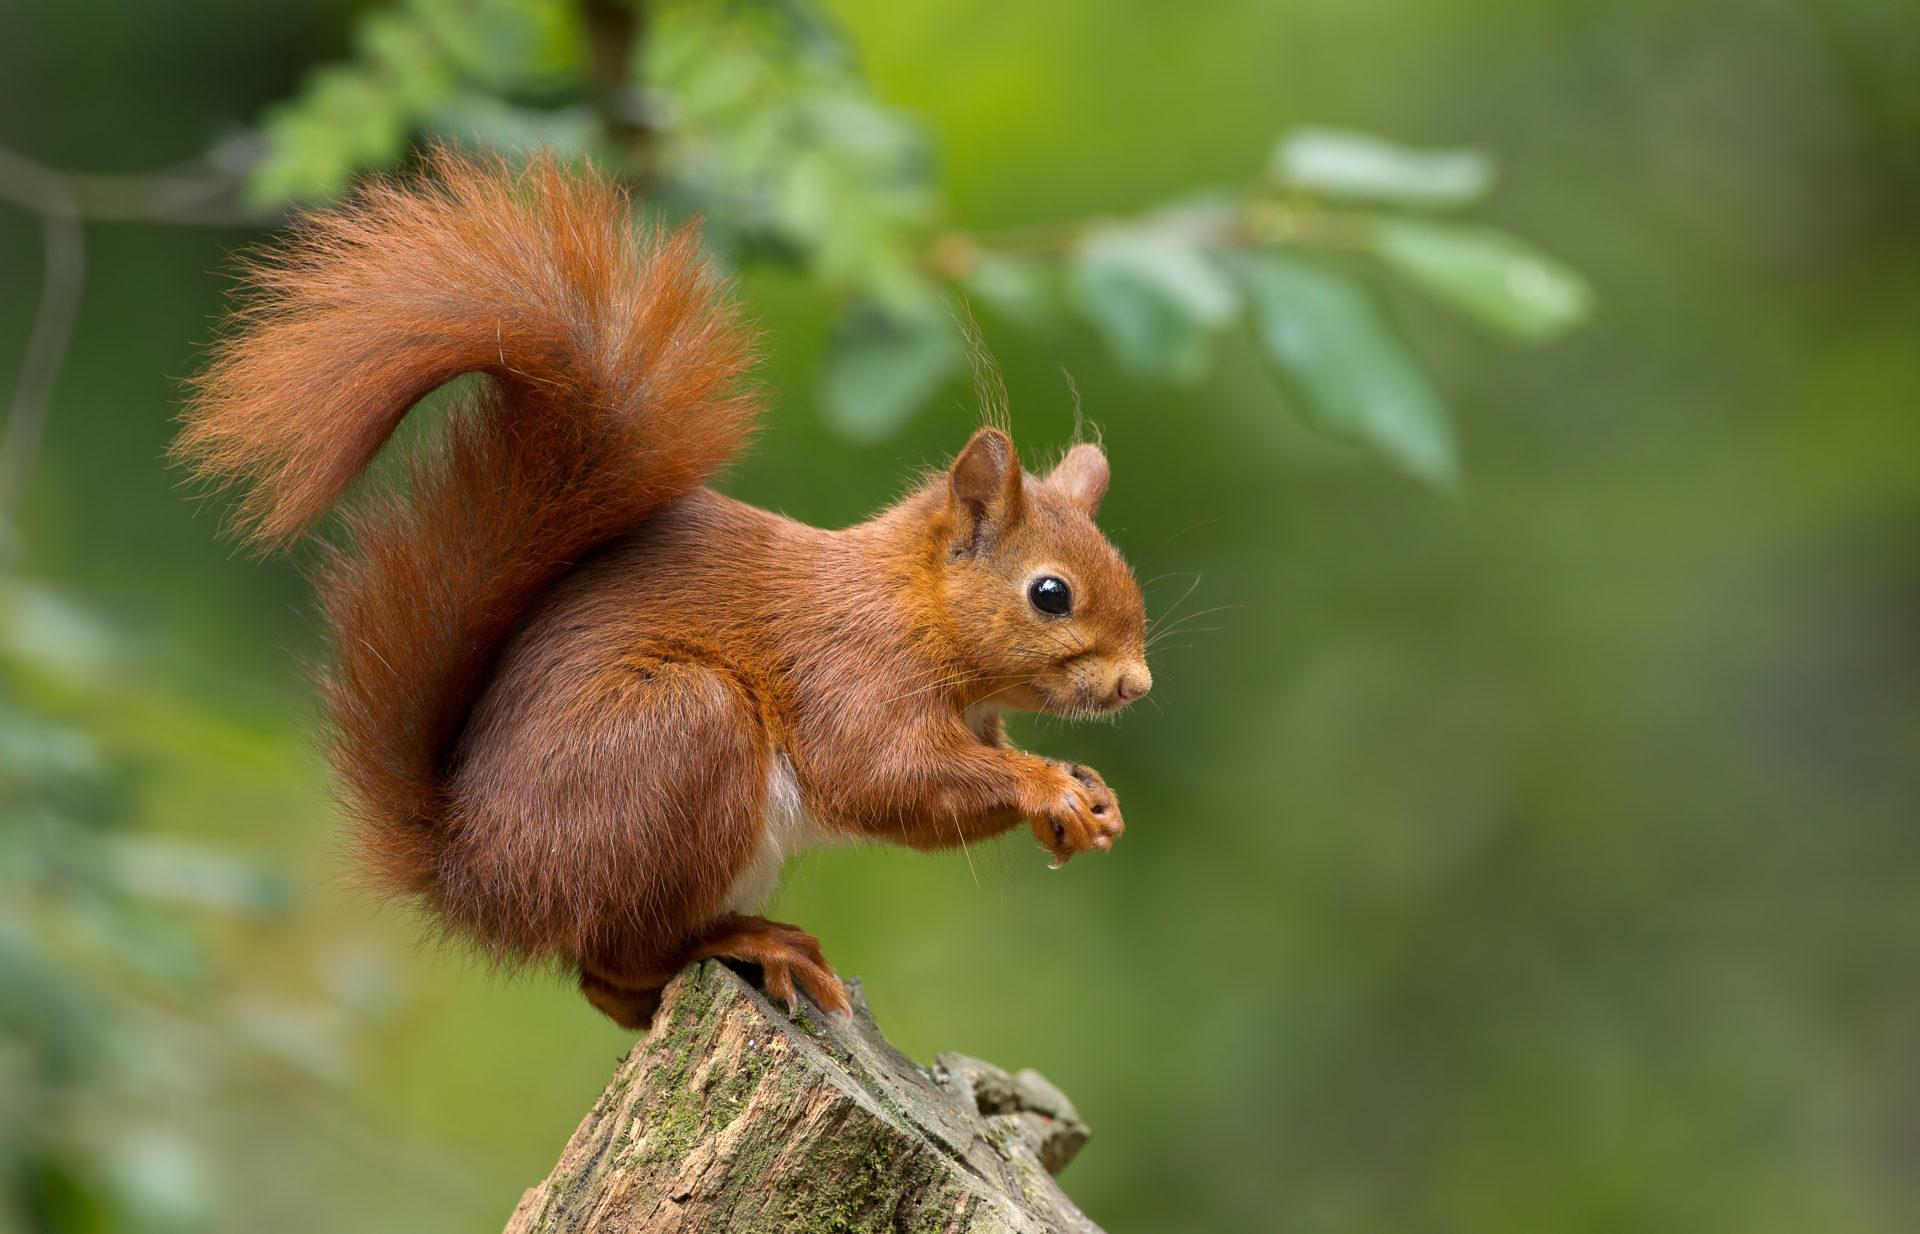 A squirrel in the autumn forest a squirrel in nature in an autumn park cute  squirrel - Stock Image - Everypixel